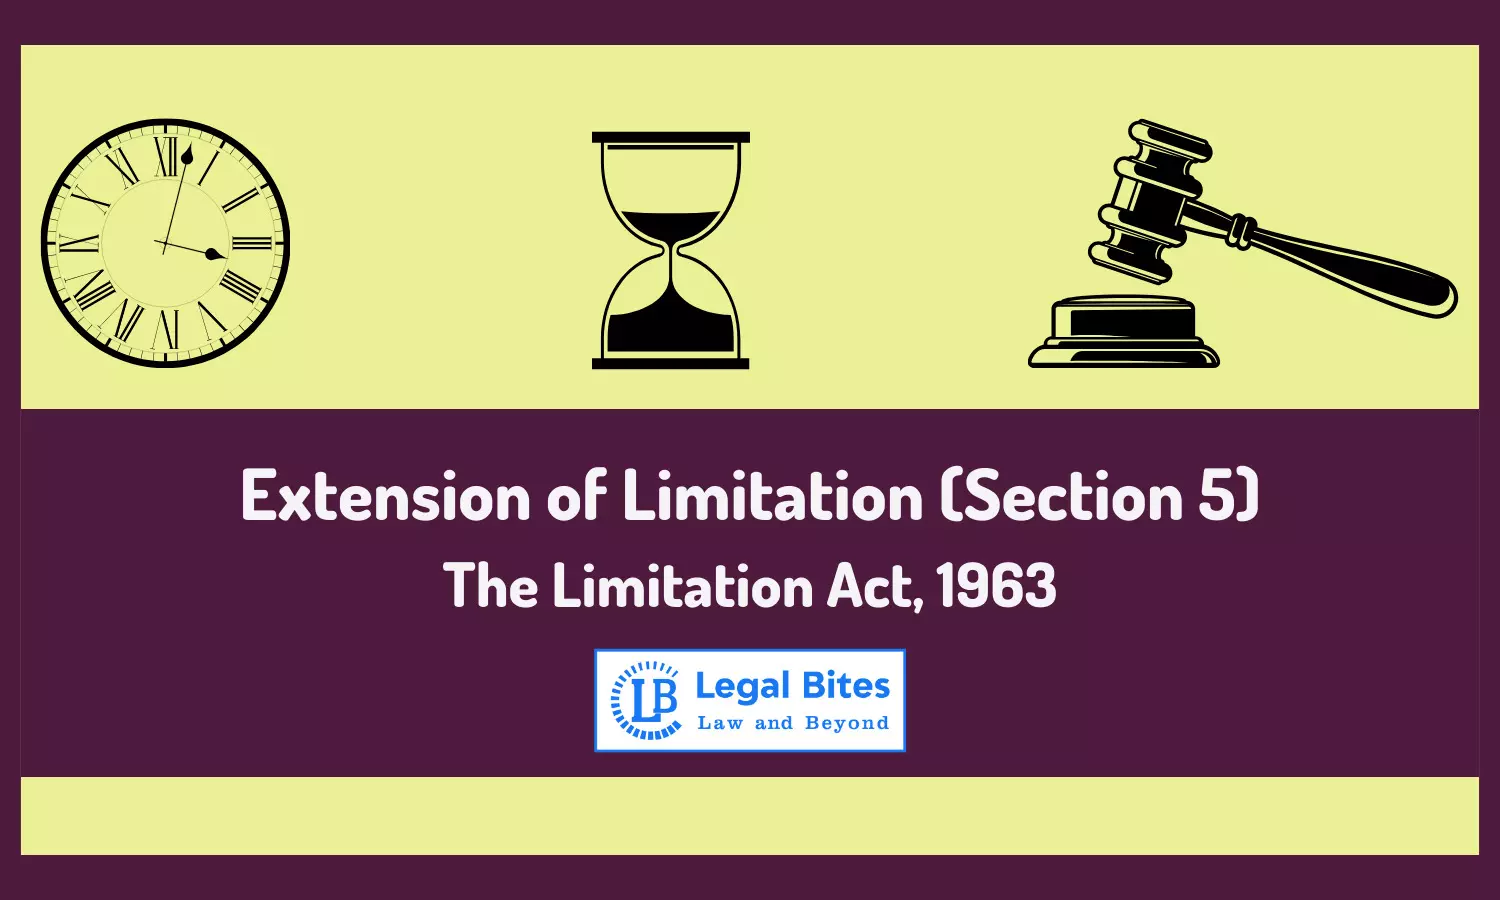 Extension of Limitation (Section 5) | The Limitation Act, 1963